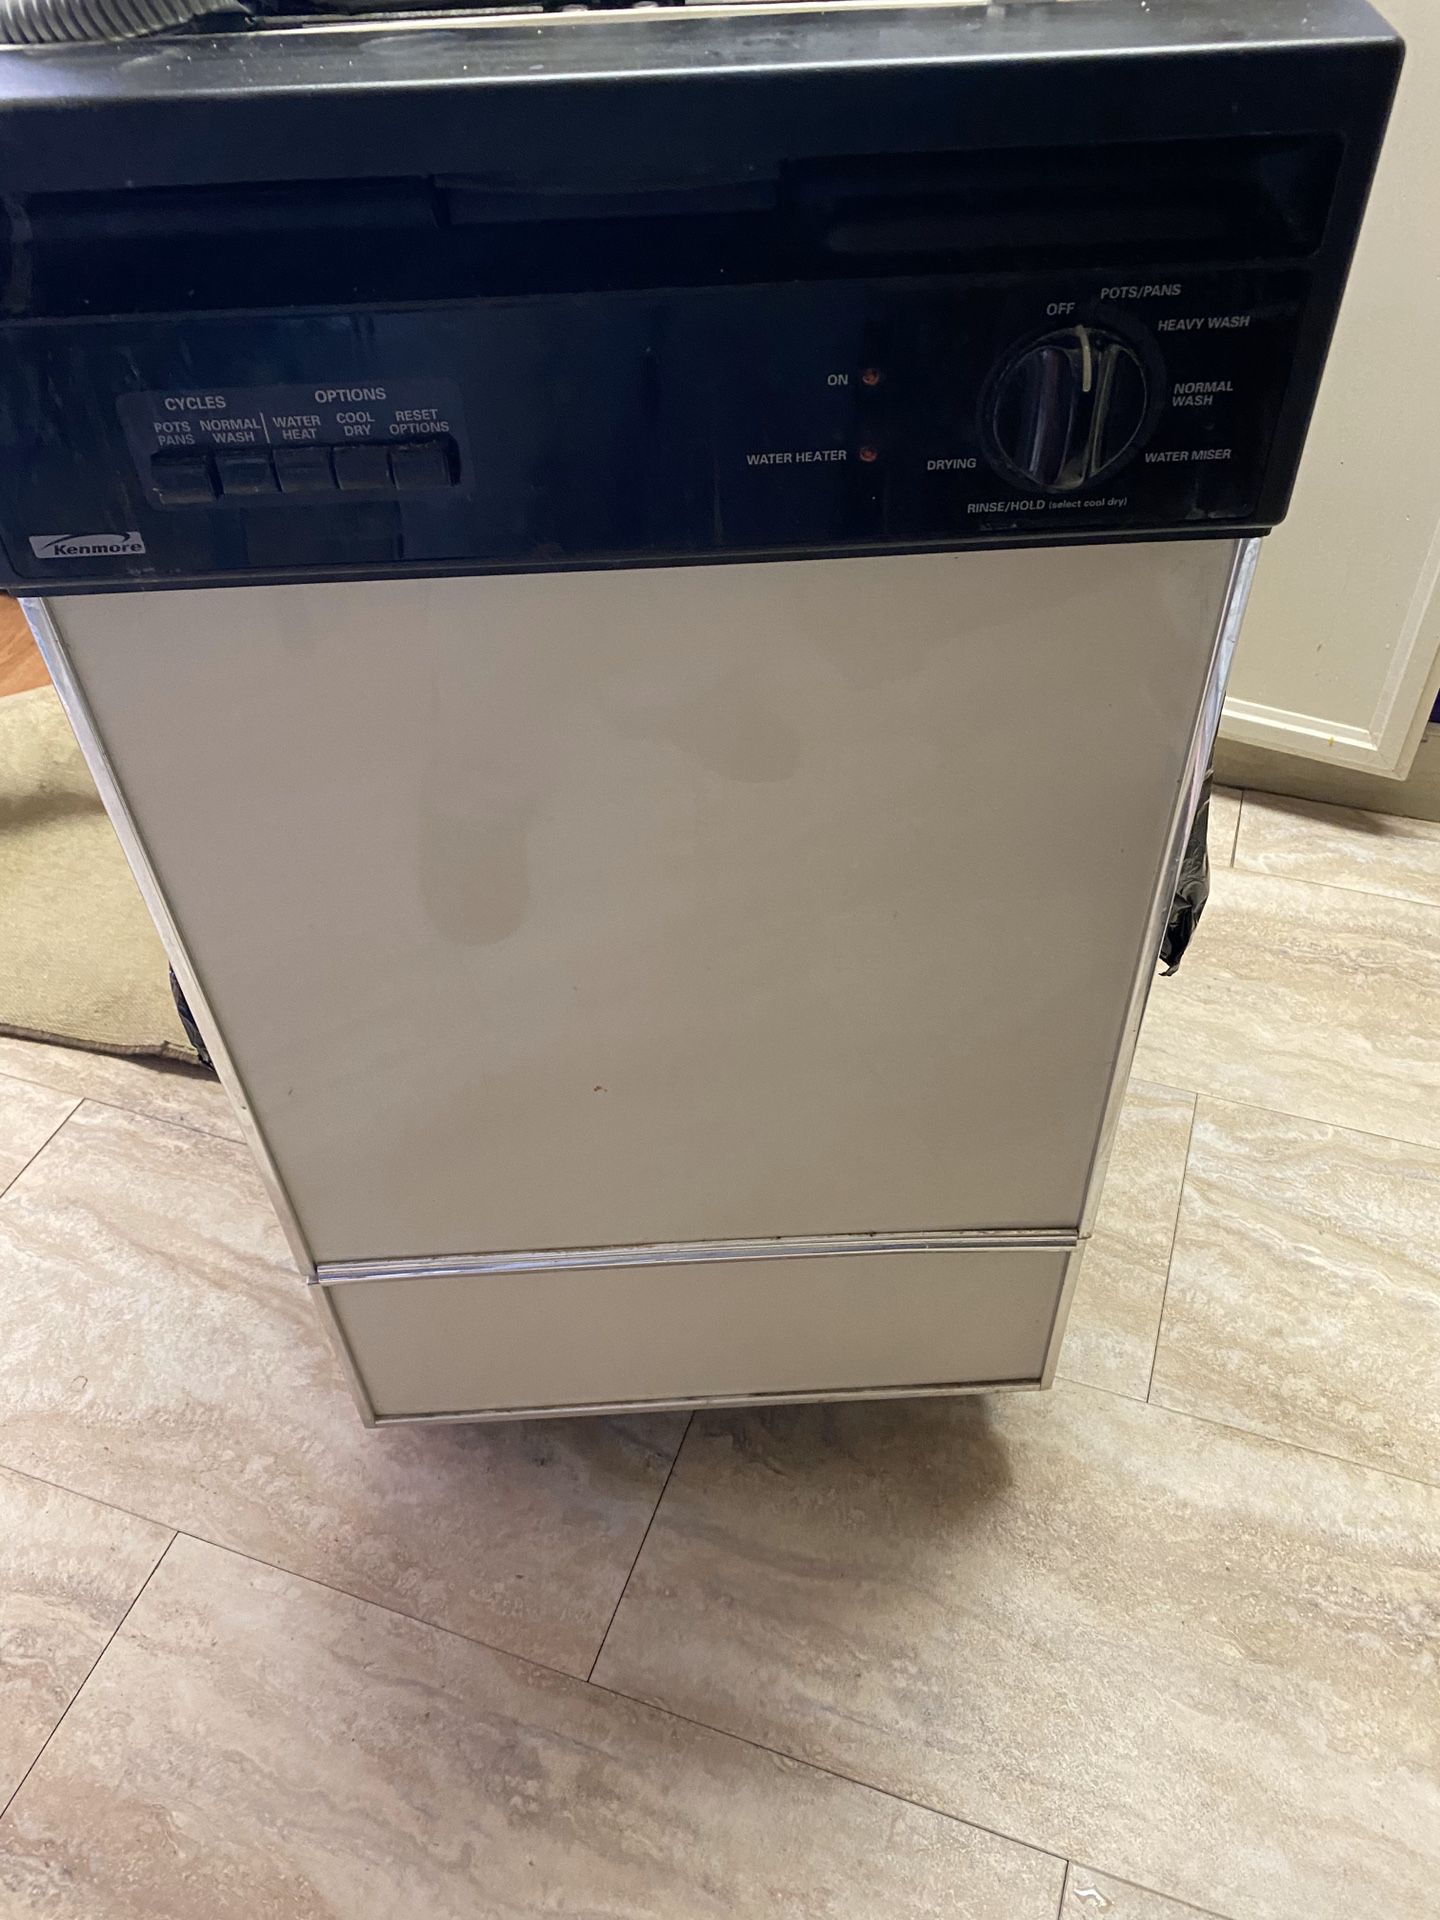 18 inch apartment size dishwasher. Almond color